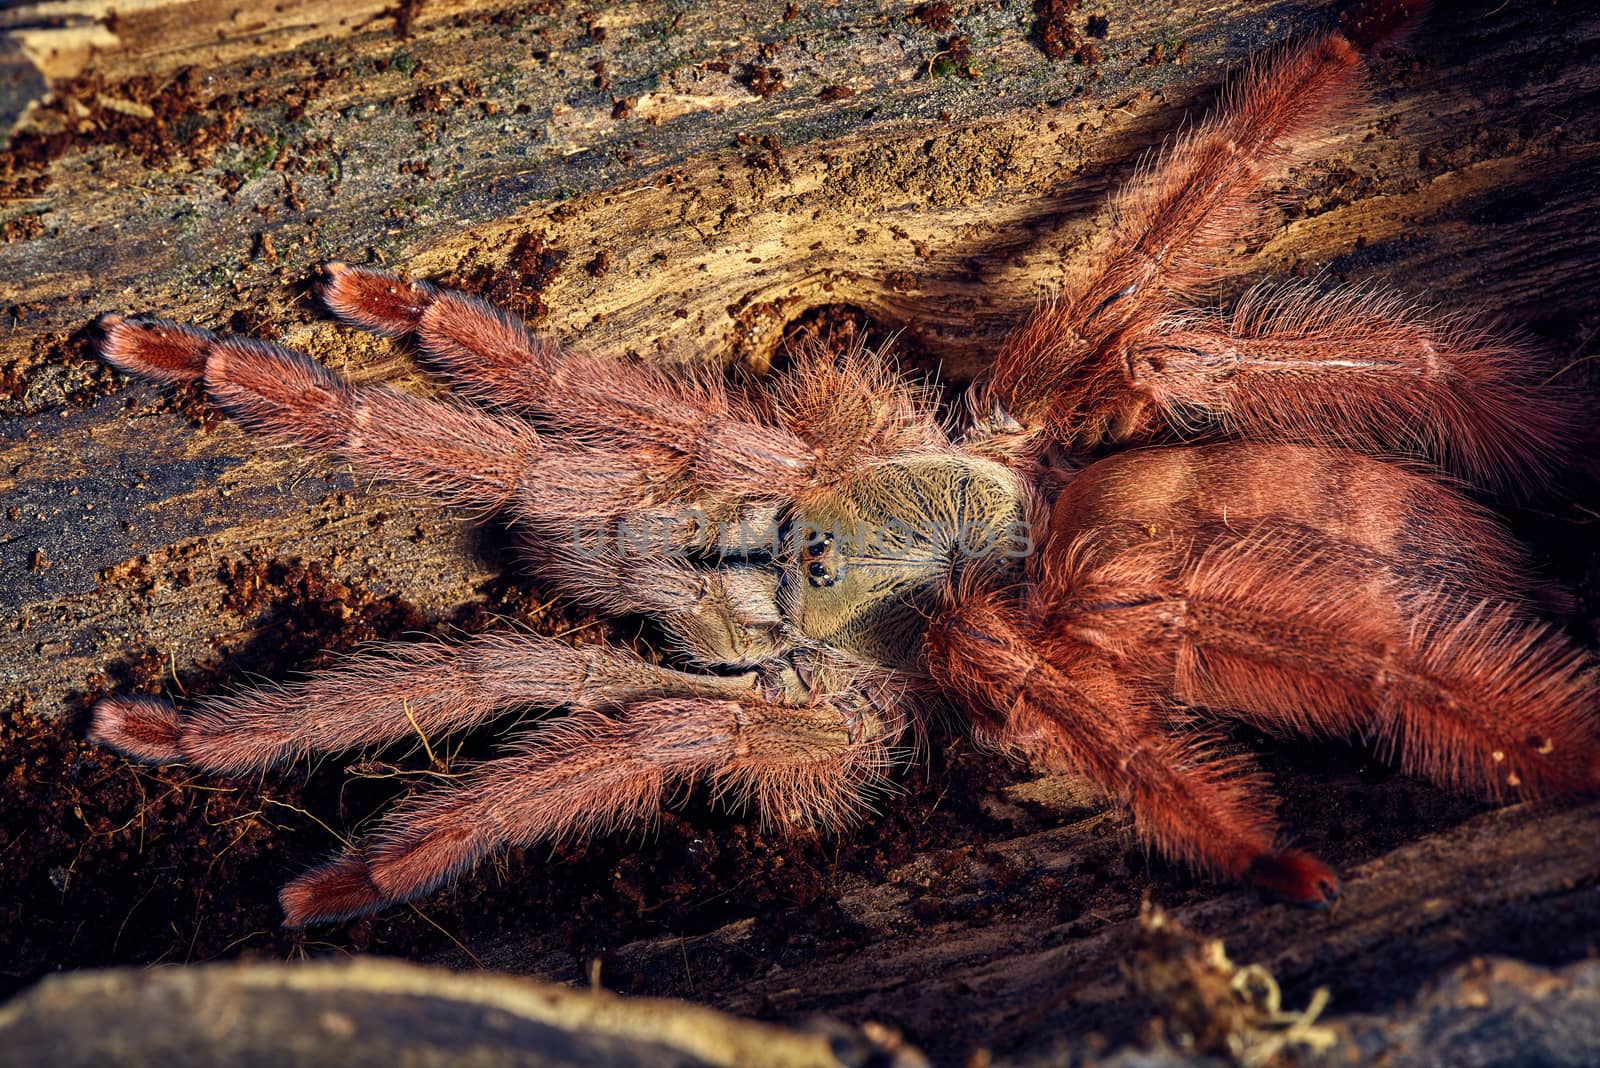 Tarantula Tapinauchenius gigas close-up on a background of brown soil 